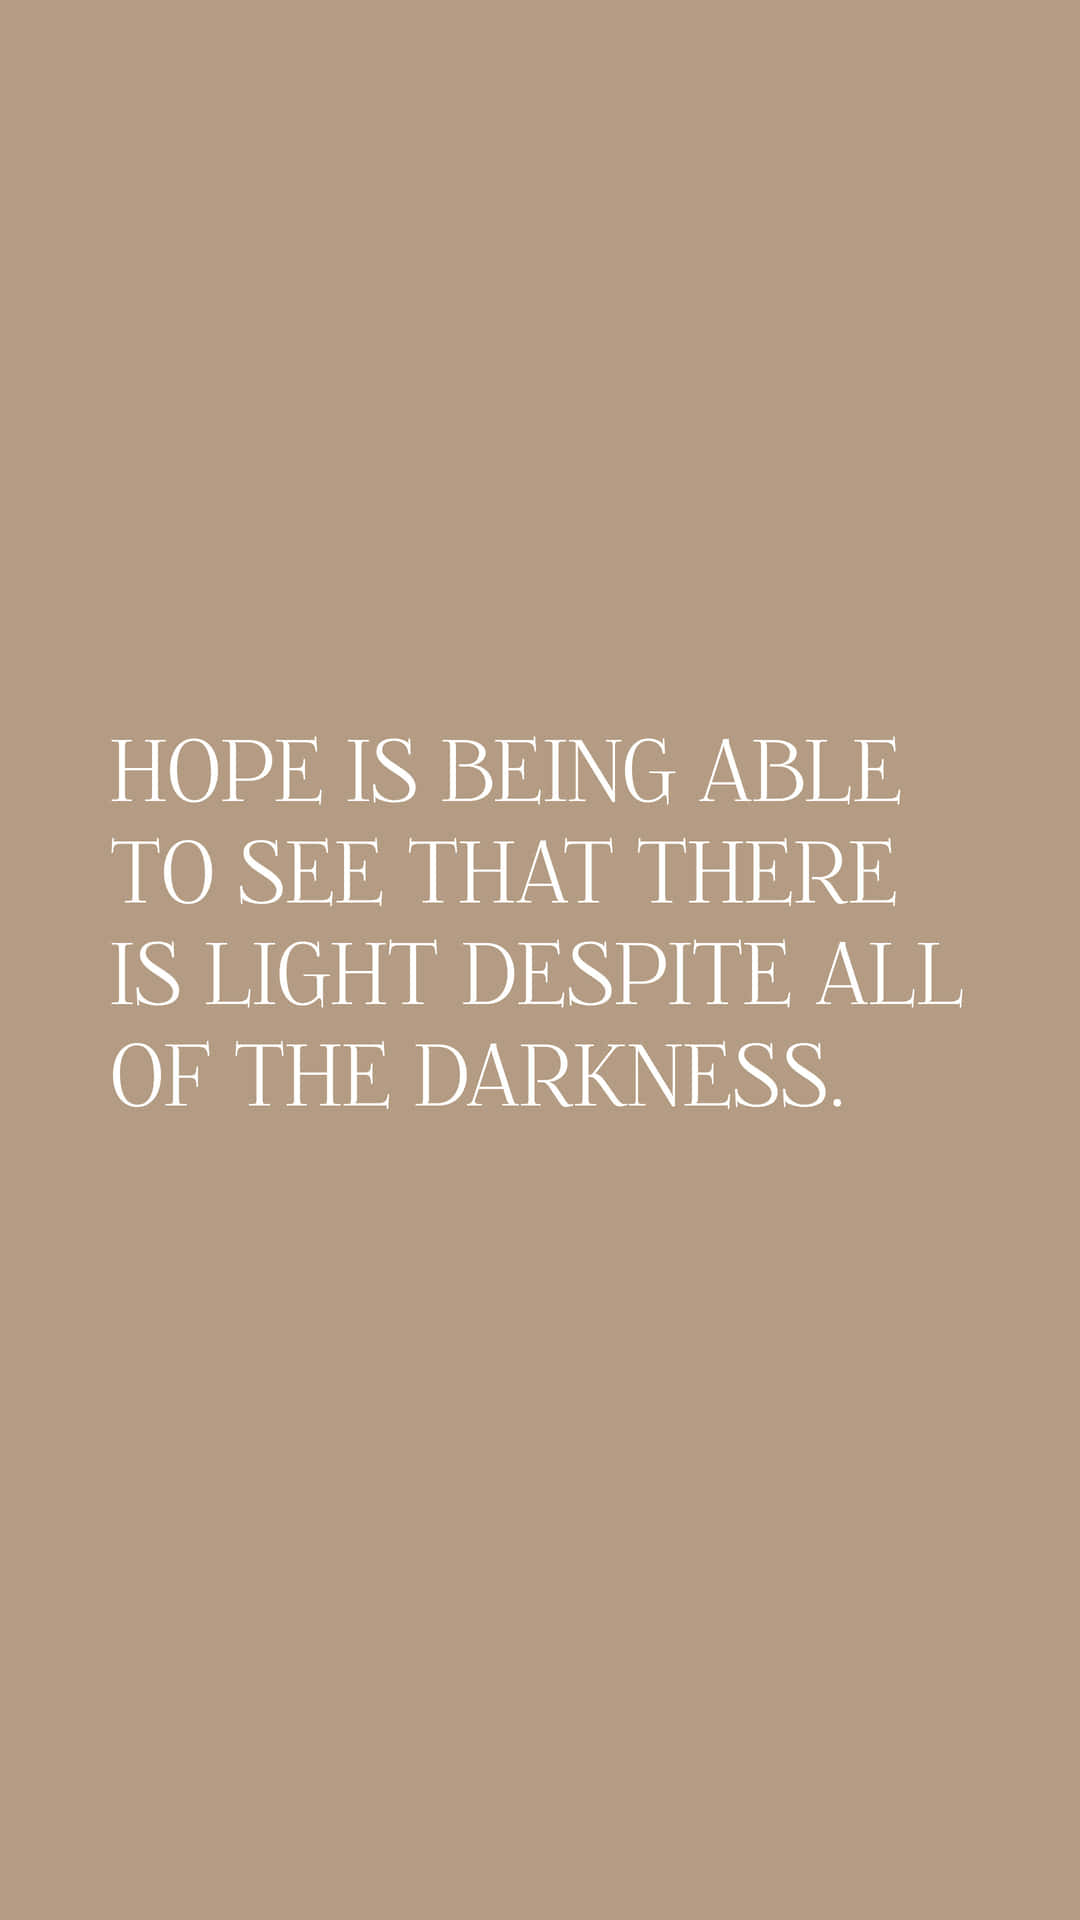 Inspiring Hope Quote Against A Warm Tan Background